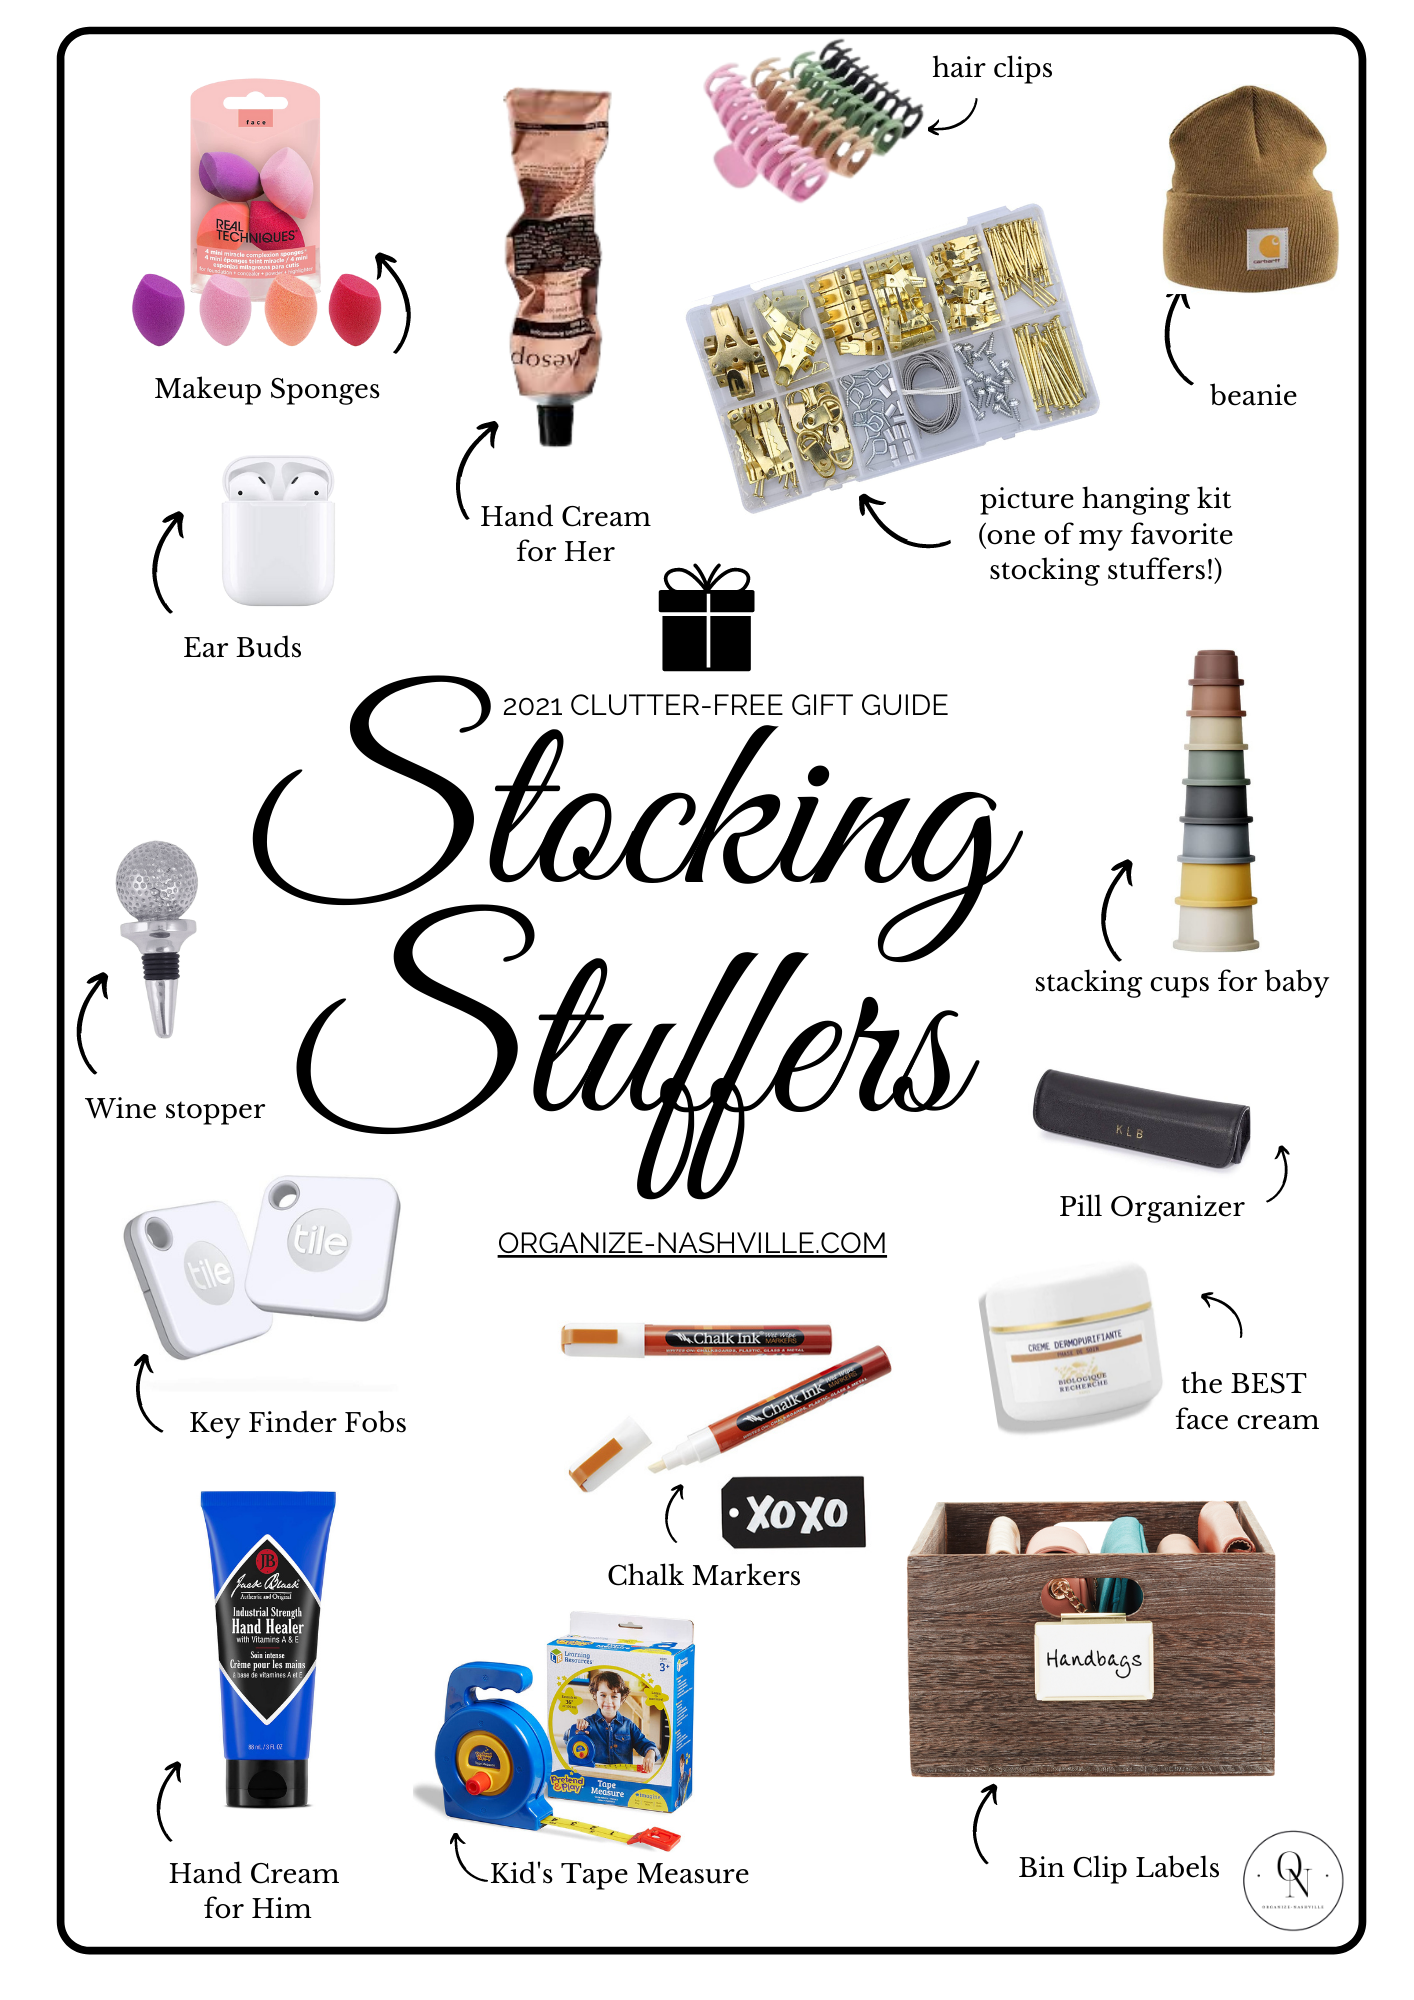 2021 Clutter-free Gift Guides: Stocking Stuffers — Organize Nashville